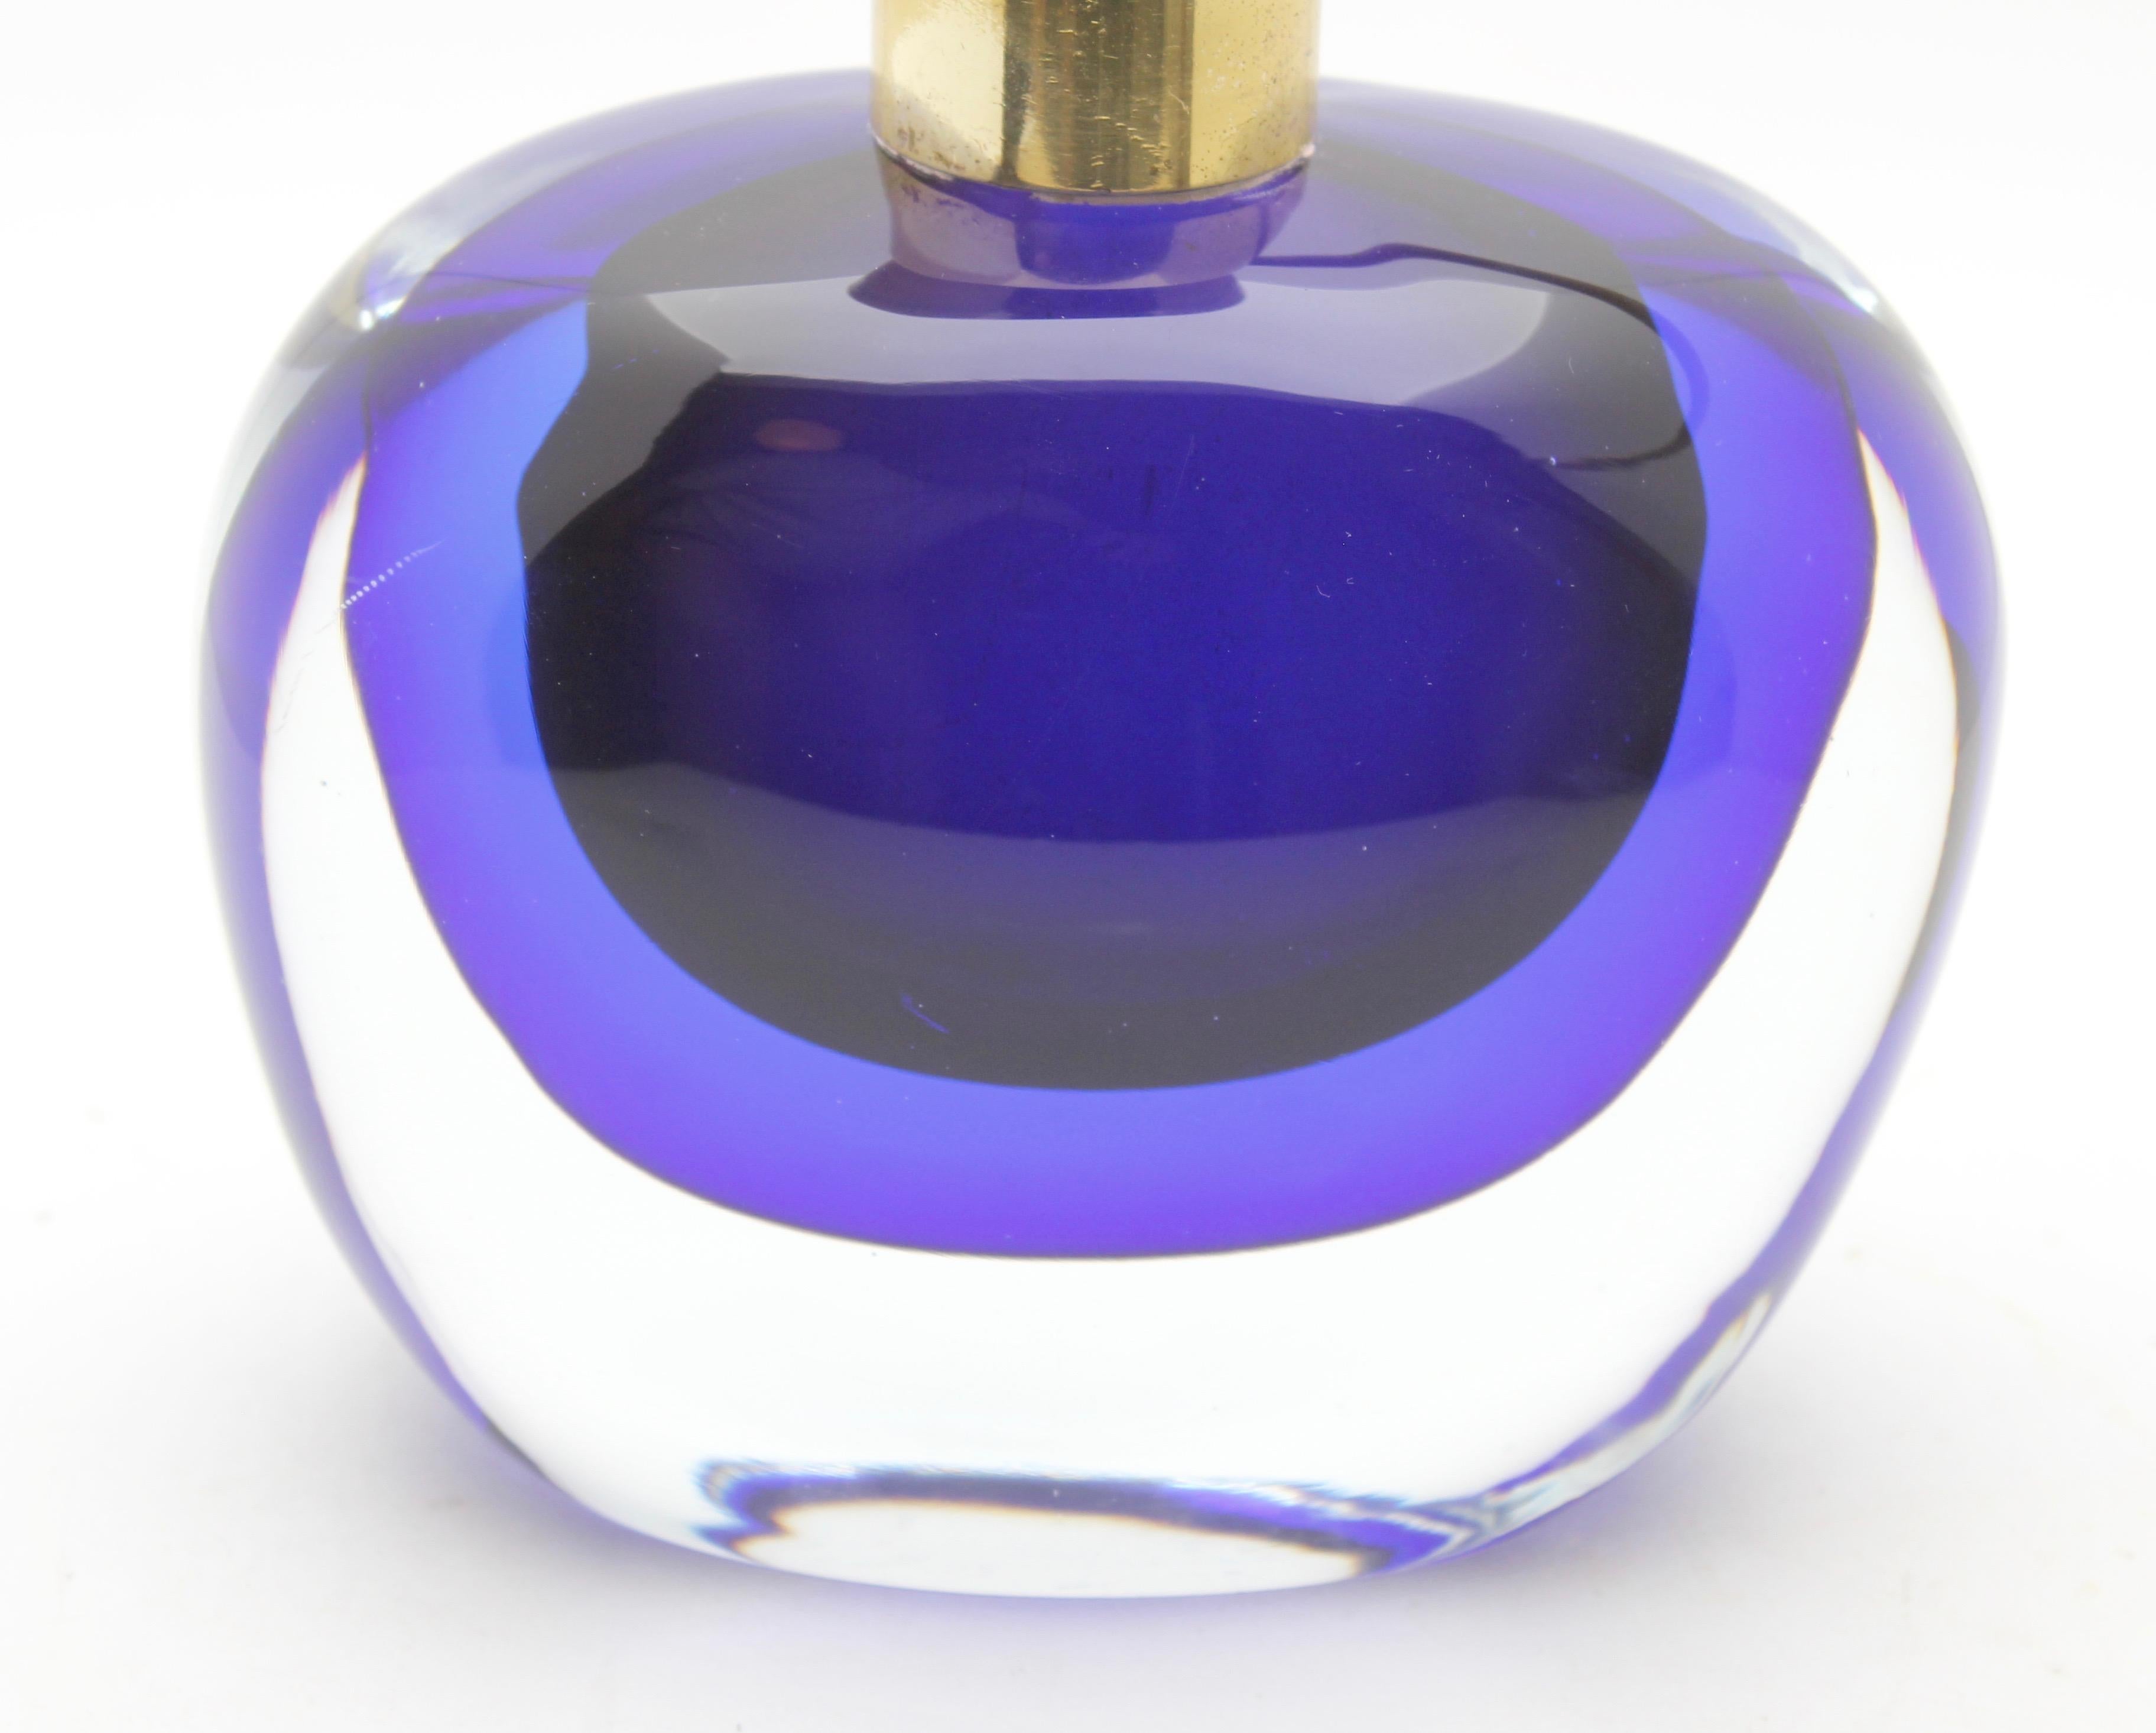 Hand-Crafted Murano Globe-Shaped Lamp Cobalt Blue with a Dramatic Jewel-Like Effect